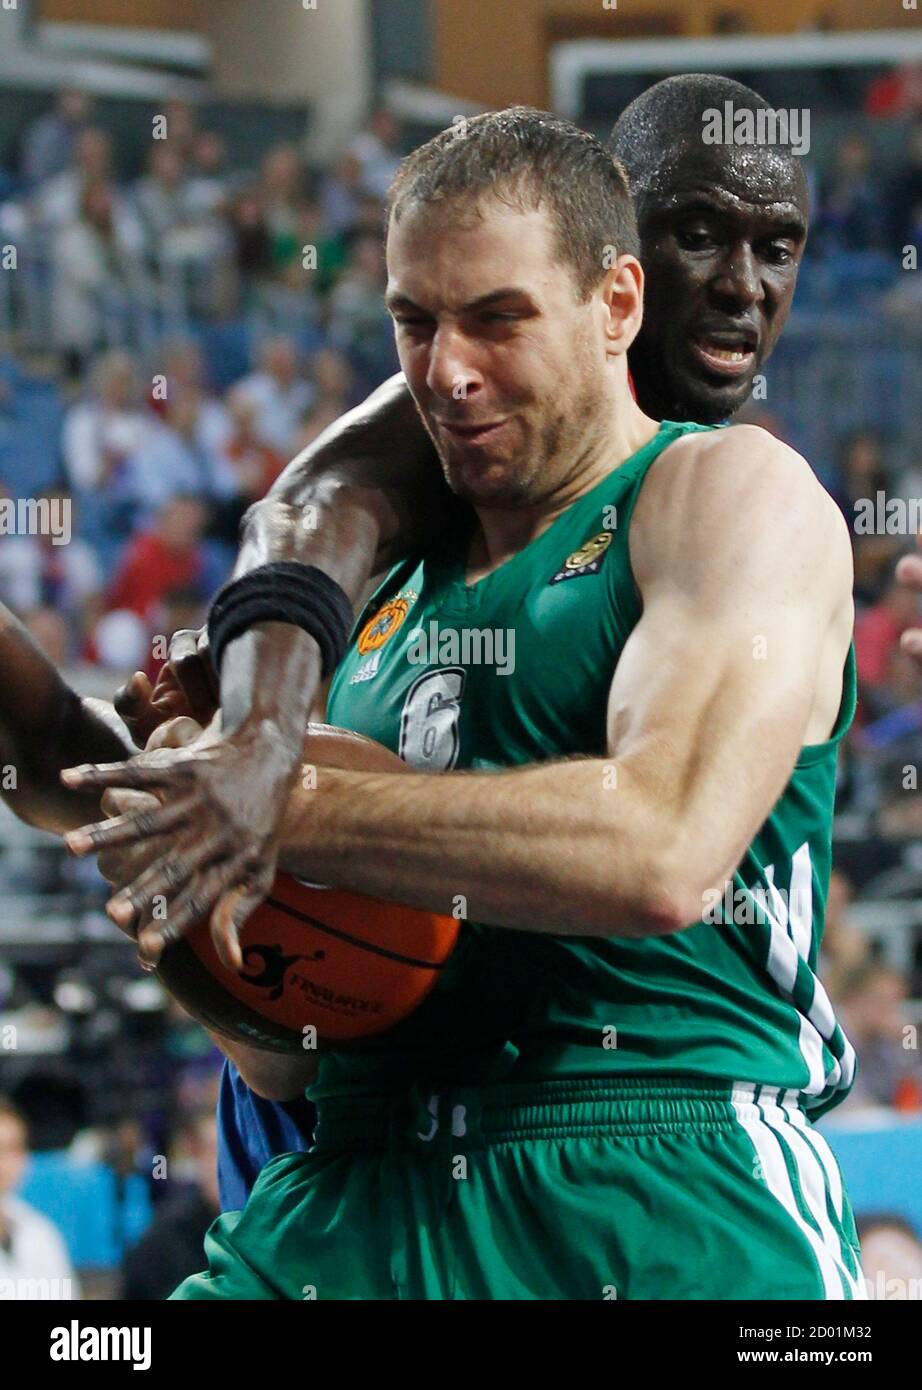 Boniface Ndong (R) of Barcelona Regal struggles for the ball with Aleks  Maric of Panathinaikos during their Euroleague basketball Final Four bronze  medal game in Istanbul May 13, 2012. REUTERS/Murad Sezer (TURKEY -